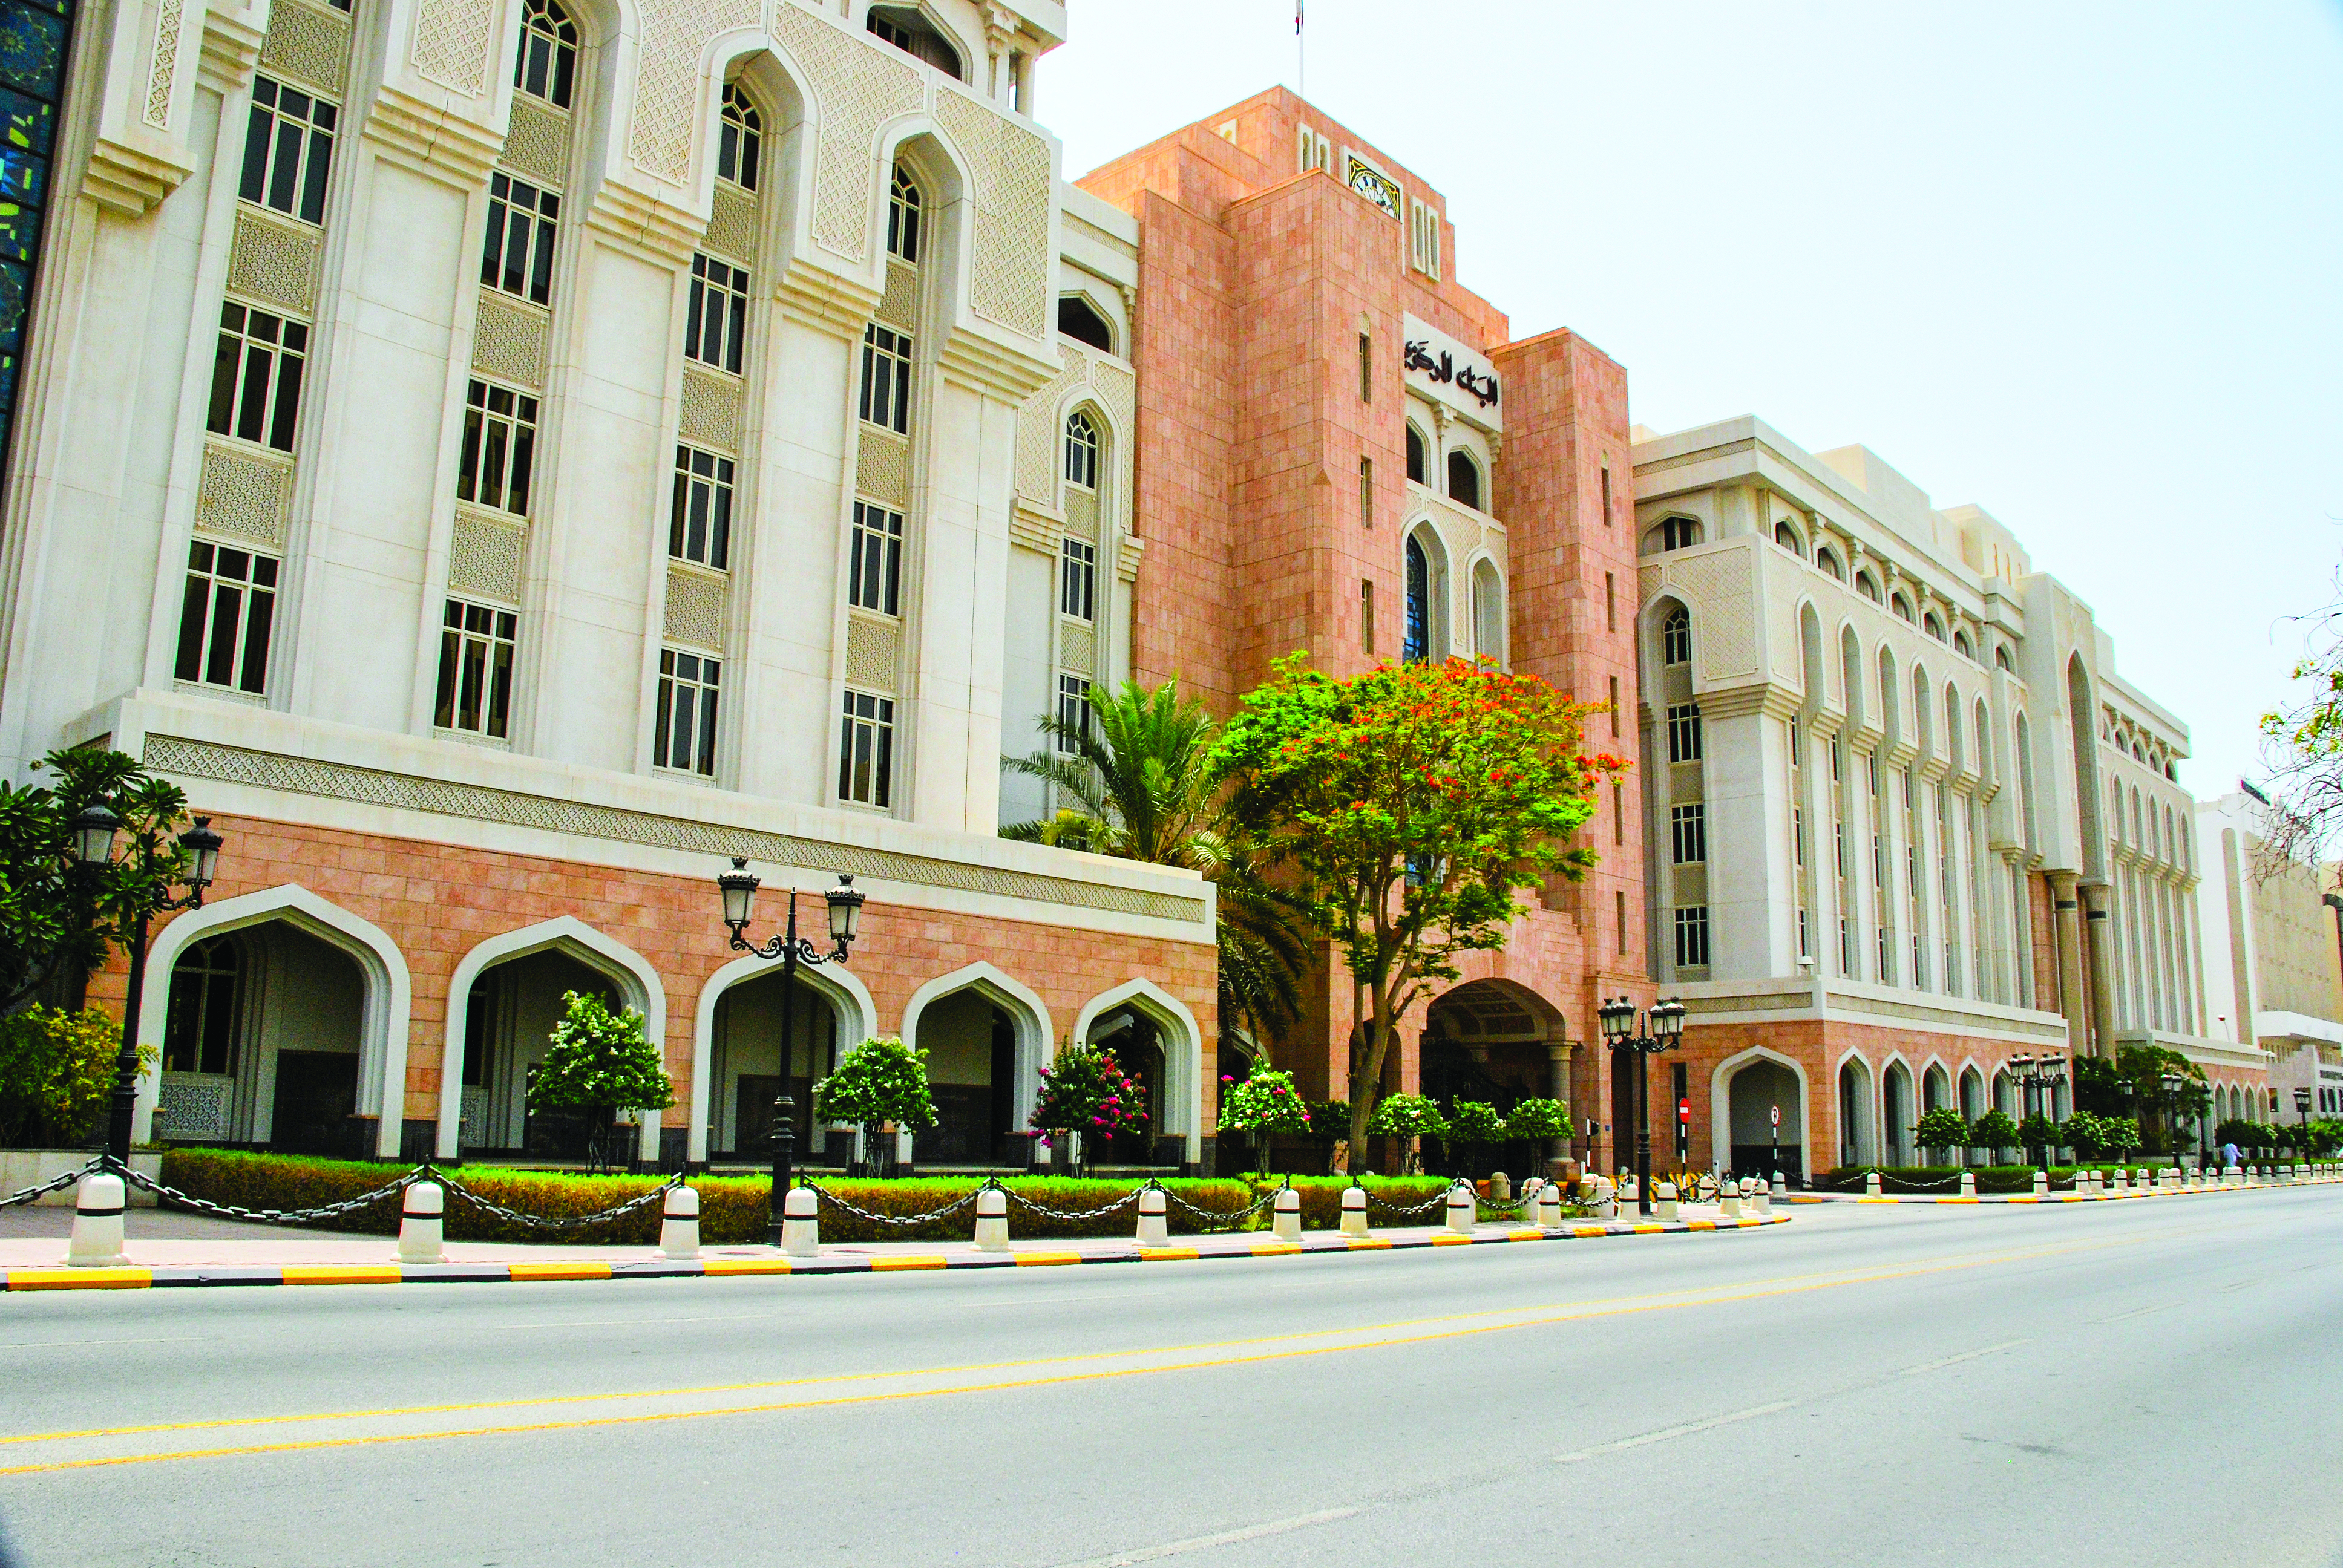 Omani banks plan to raise capital by issuing bonus shares